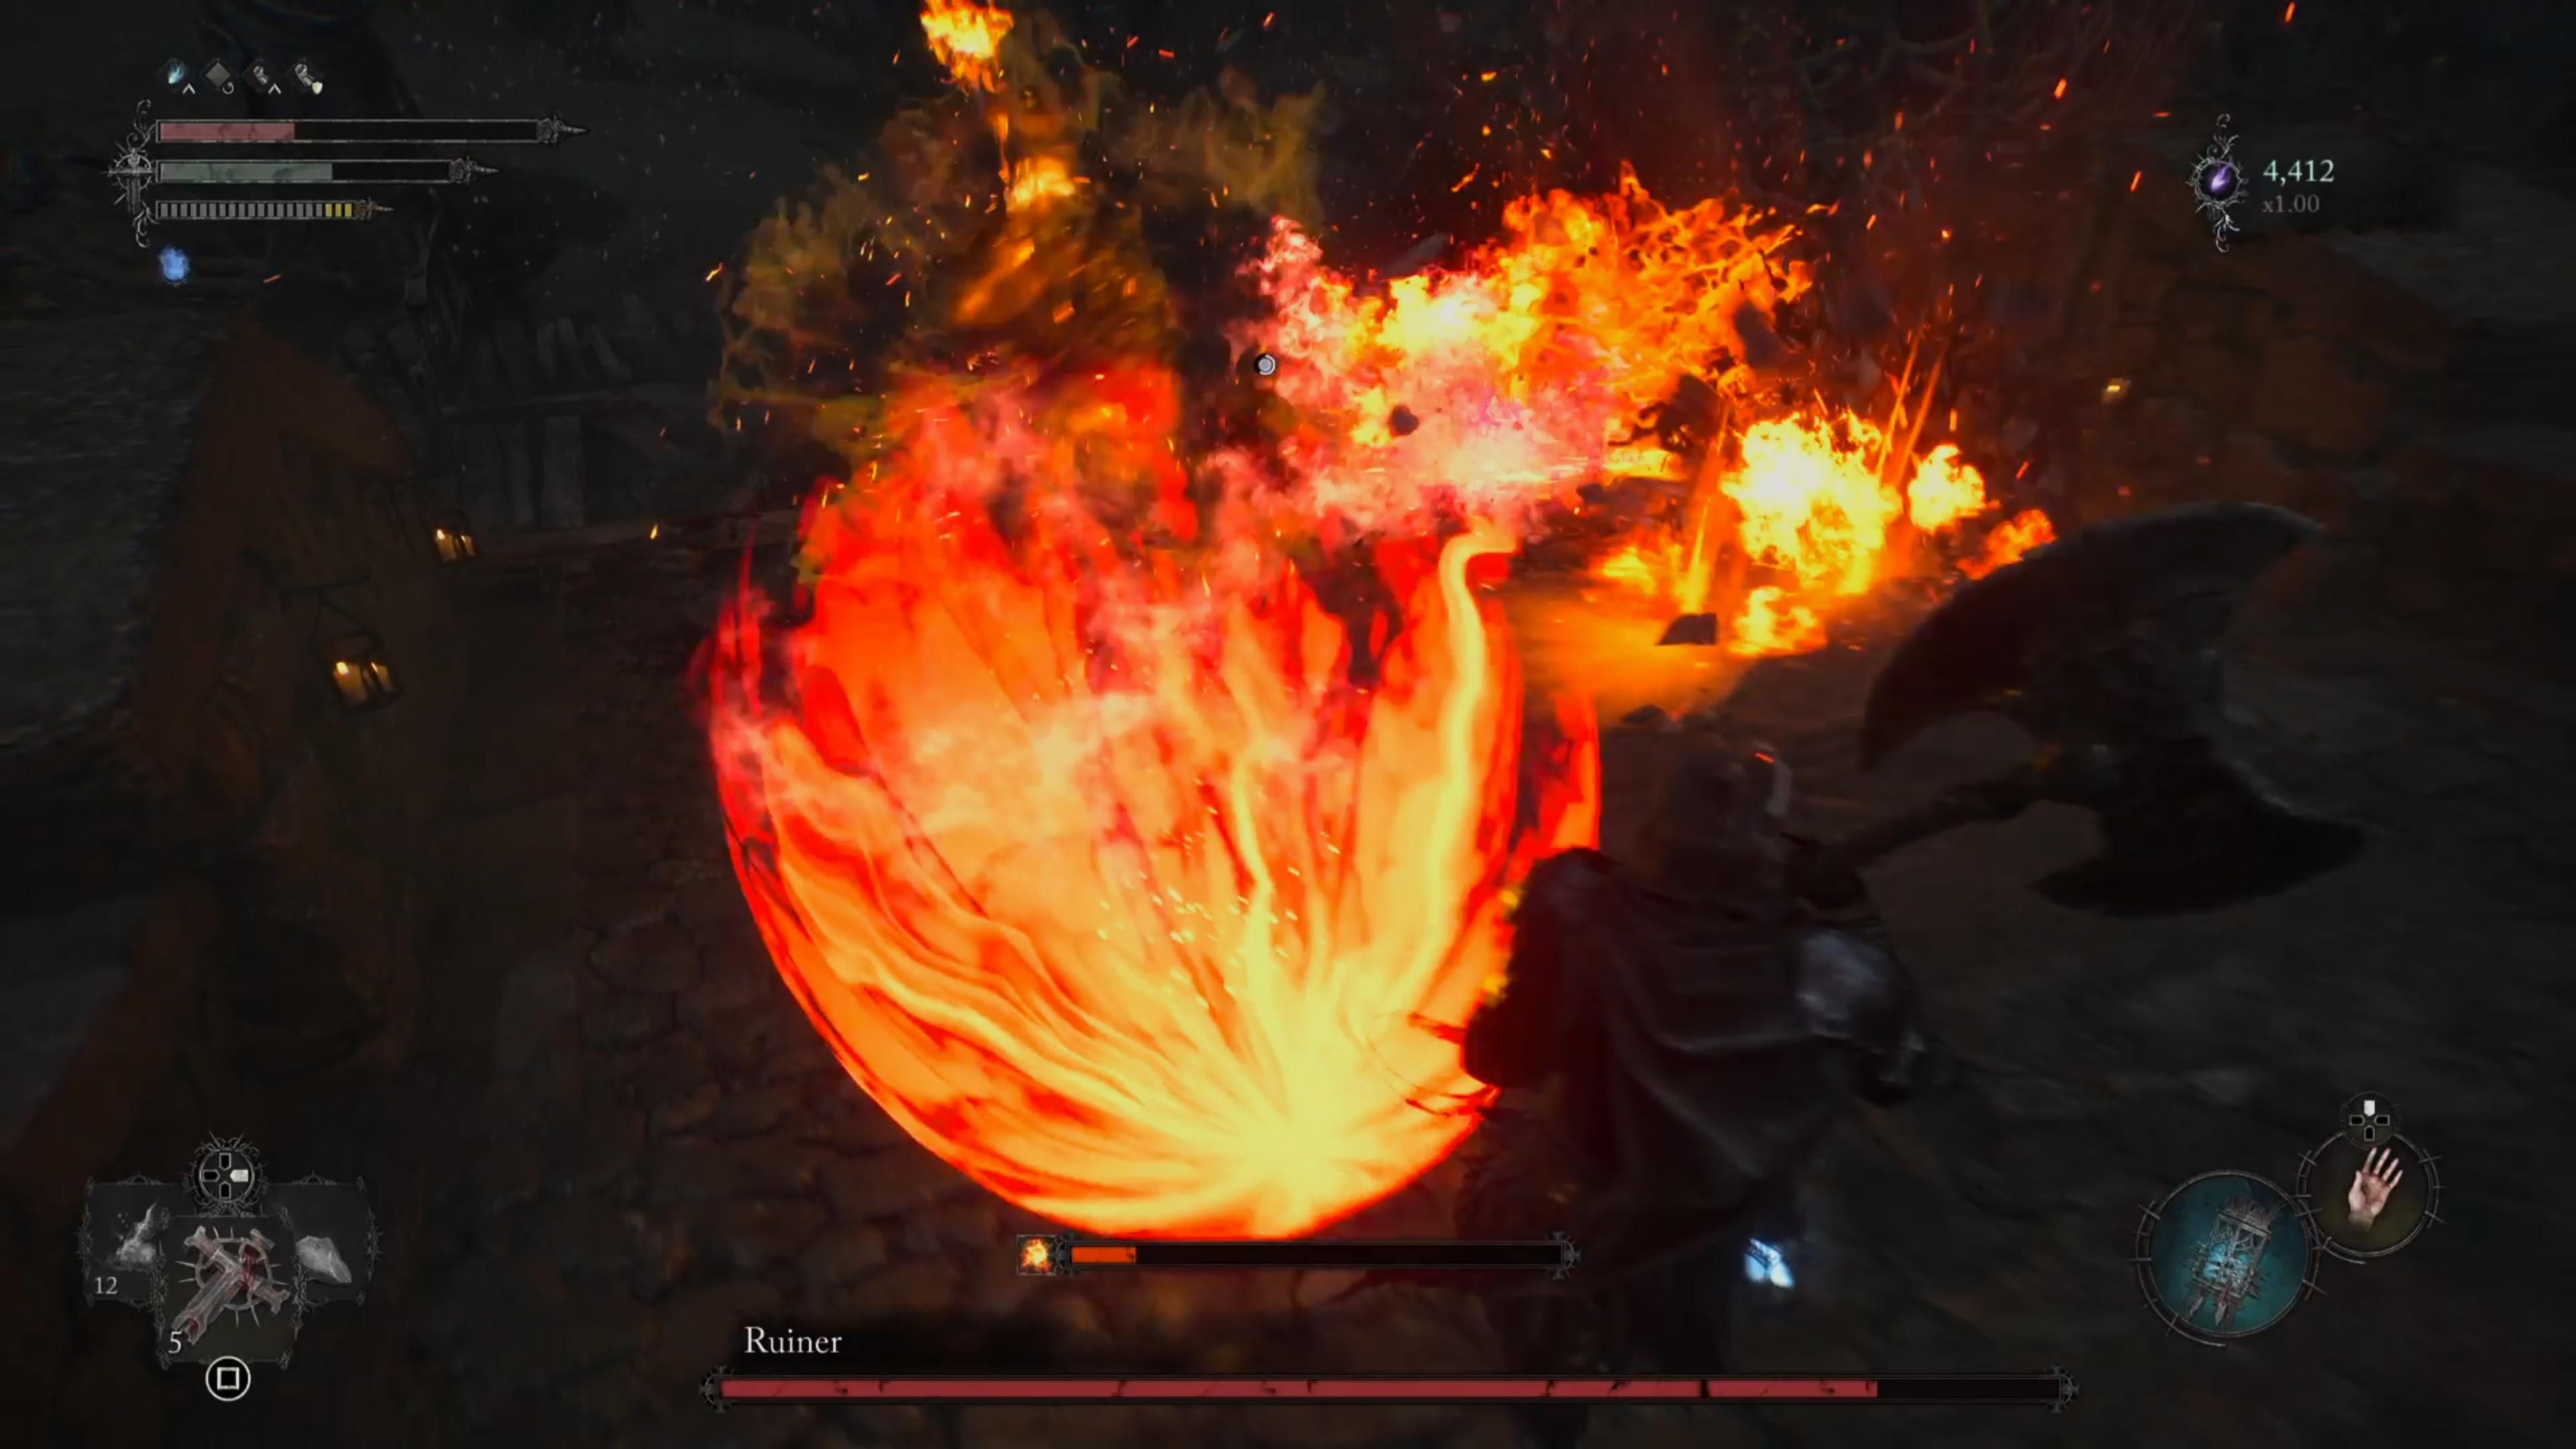 Ruiner boss dealing massive fire damage attack in Lords of the Fallen